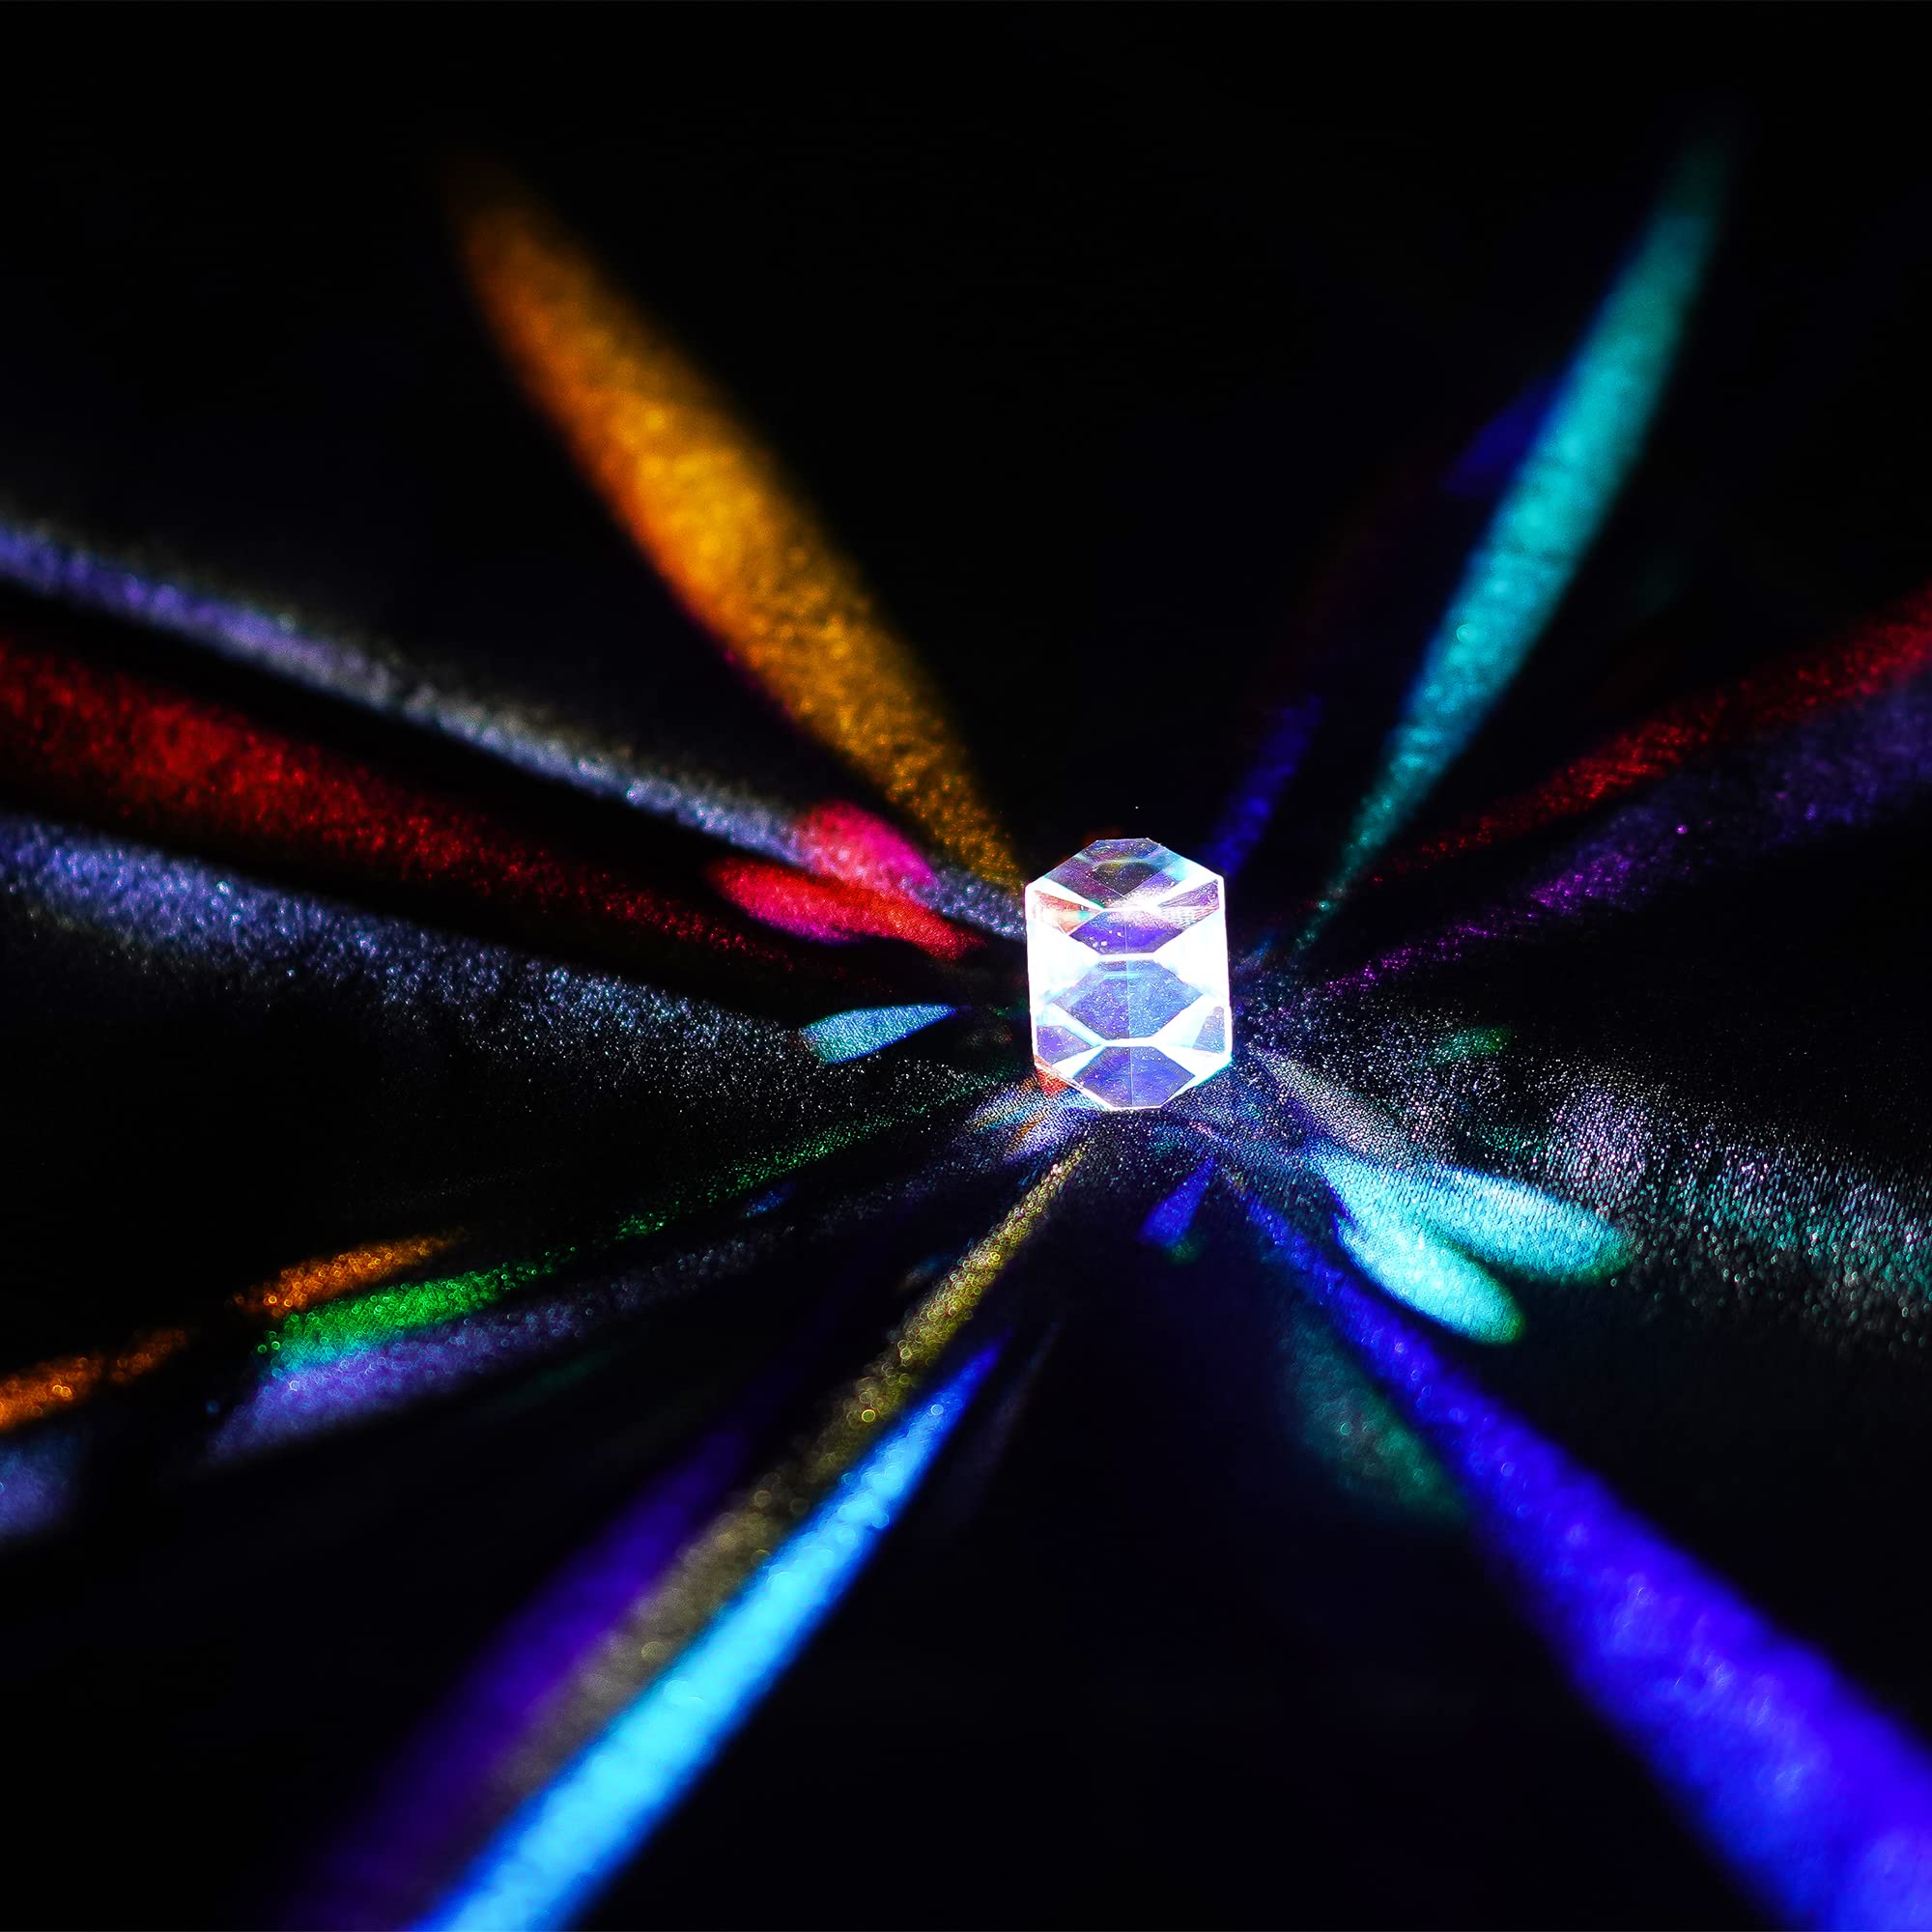 HDCRYSTALGIFTS Color Cube Prism 20mm K9 Optical Crystal Glass Polyhedron RGB Dispersion Prism for Physics,Photography,Desktop Decoration